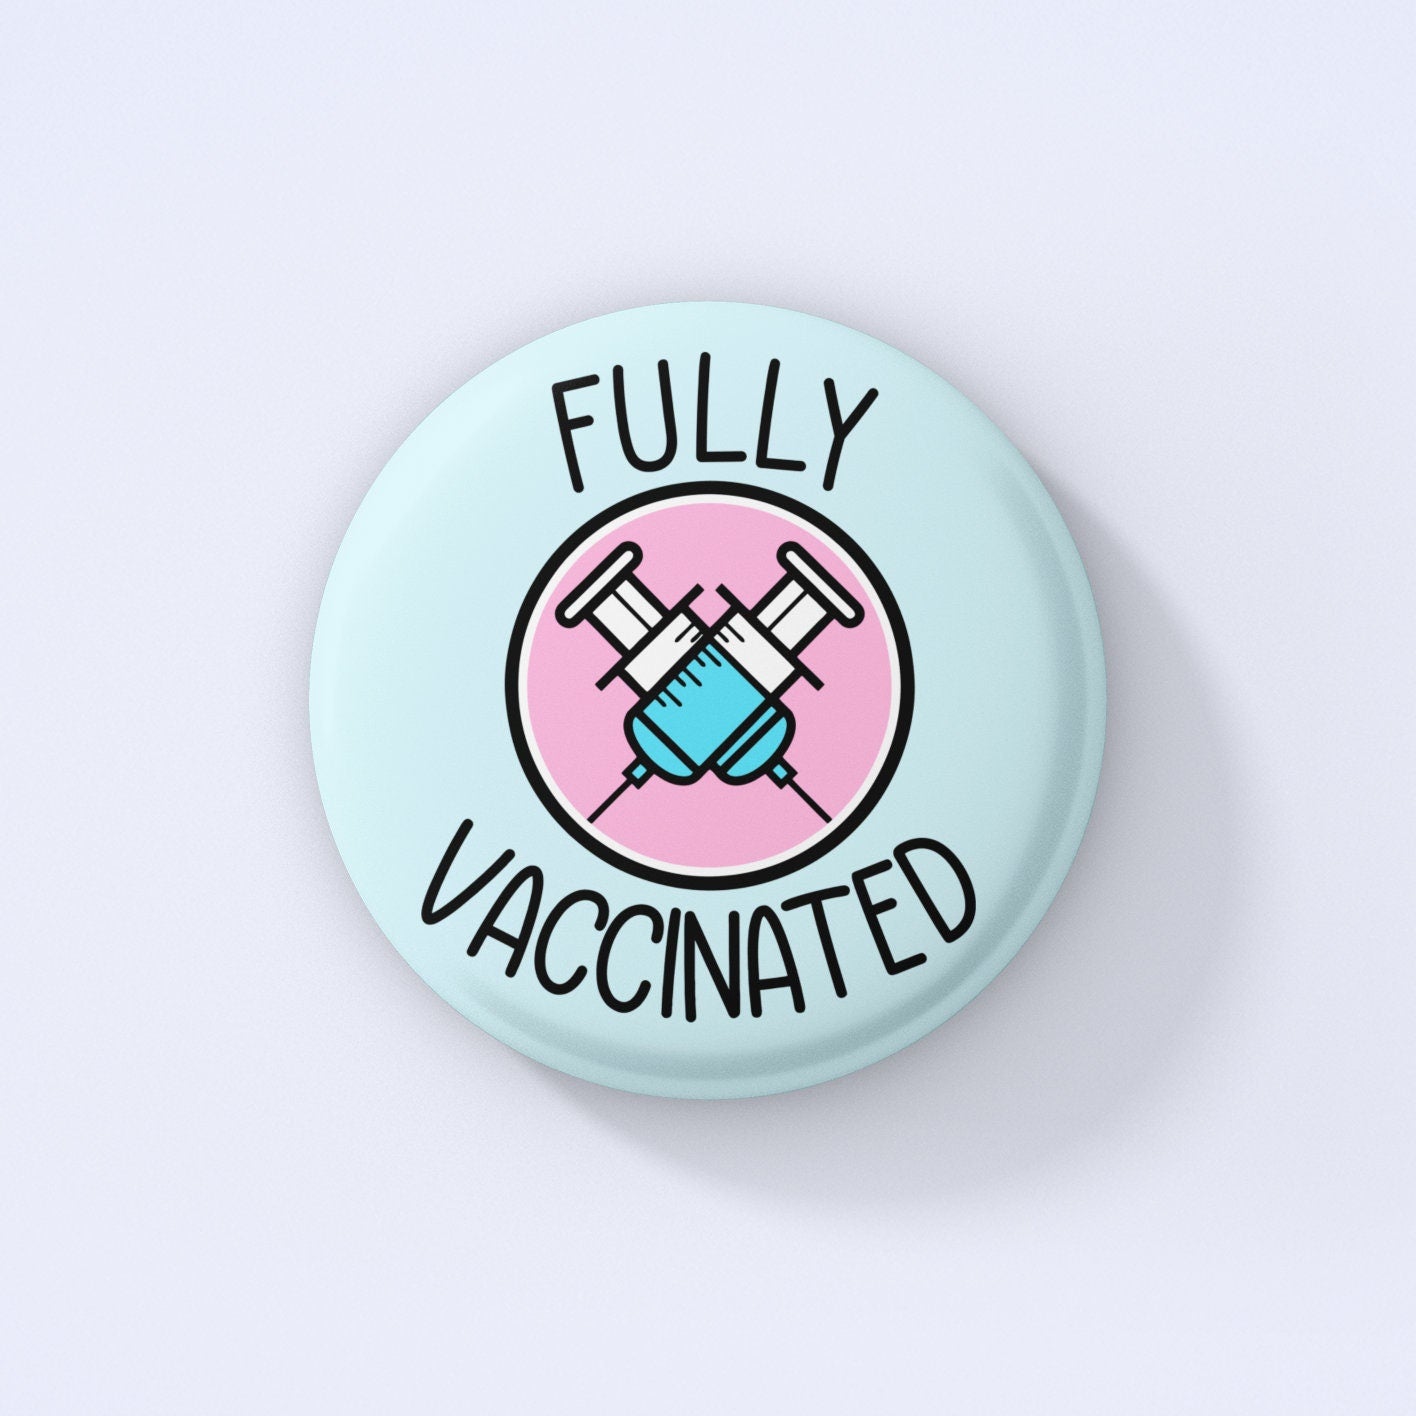 Vaccinated Covid Badge Pin | I've been vaccinated - NHS - Covid Vaccine - Pro vaccine